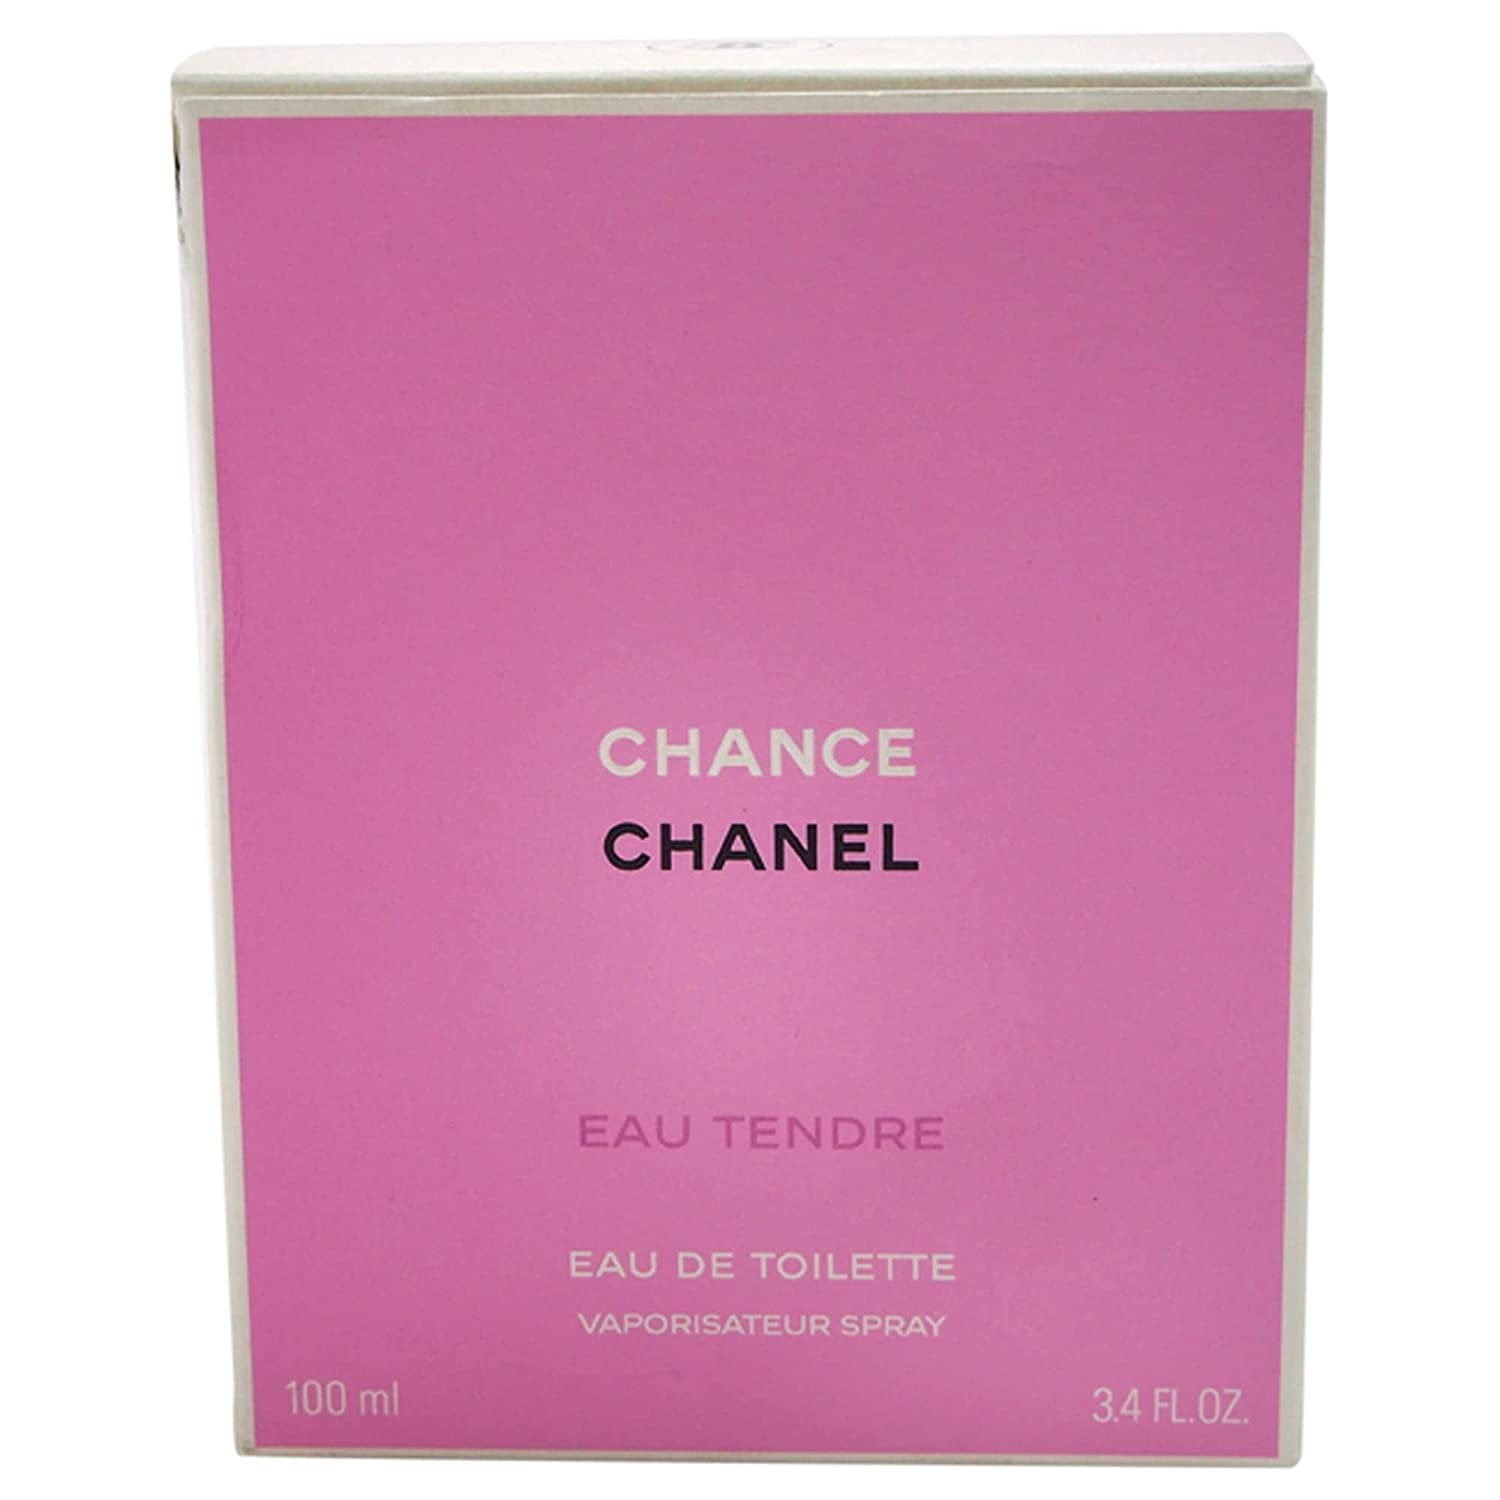 Chanel Chance Eau Tendre By Chanel 3.4 Oz Edt Brand New in Box